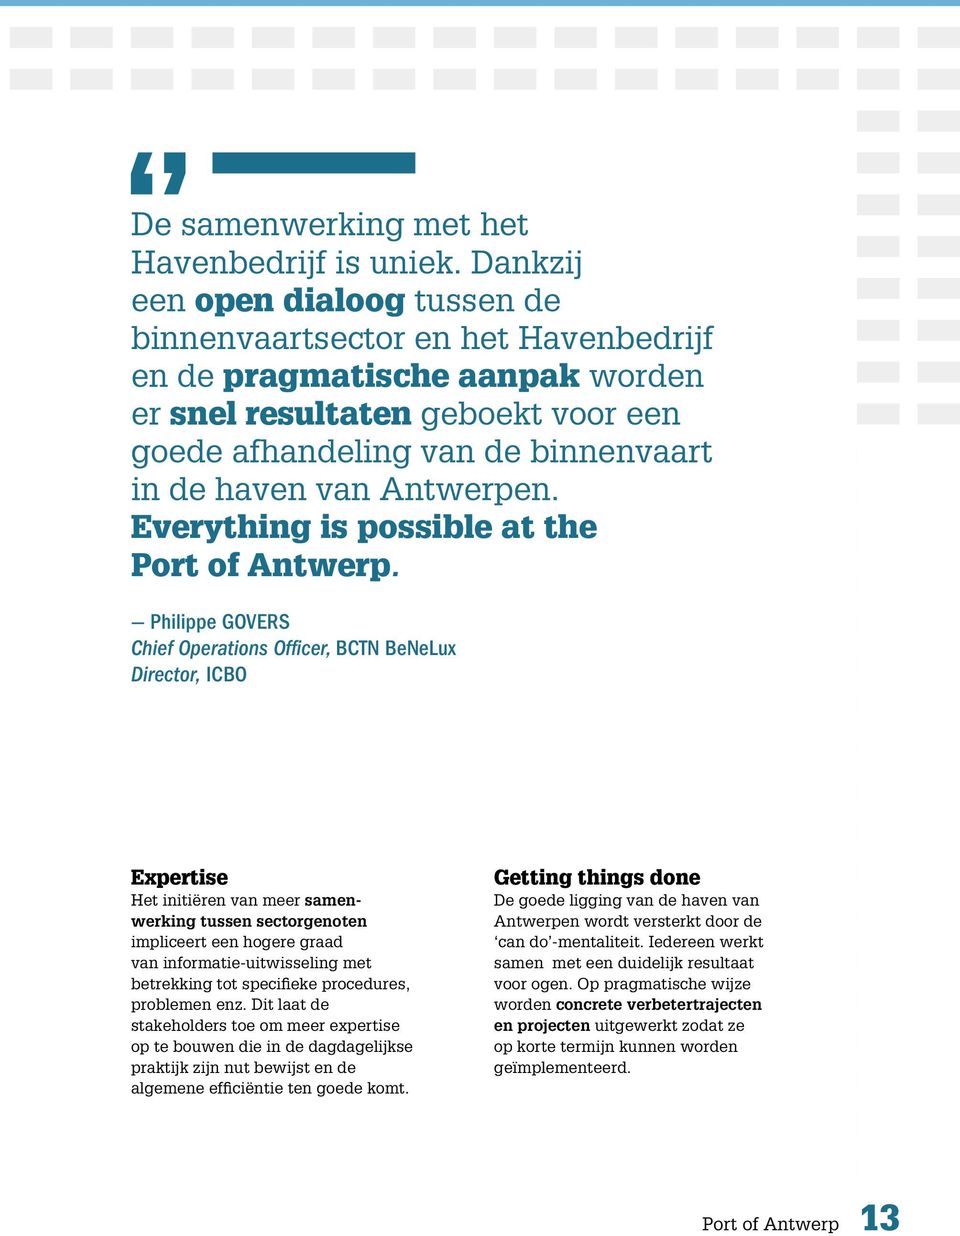 Antwerpen. Everything is possible at the Port of Antwerp.